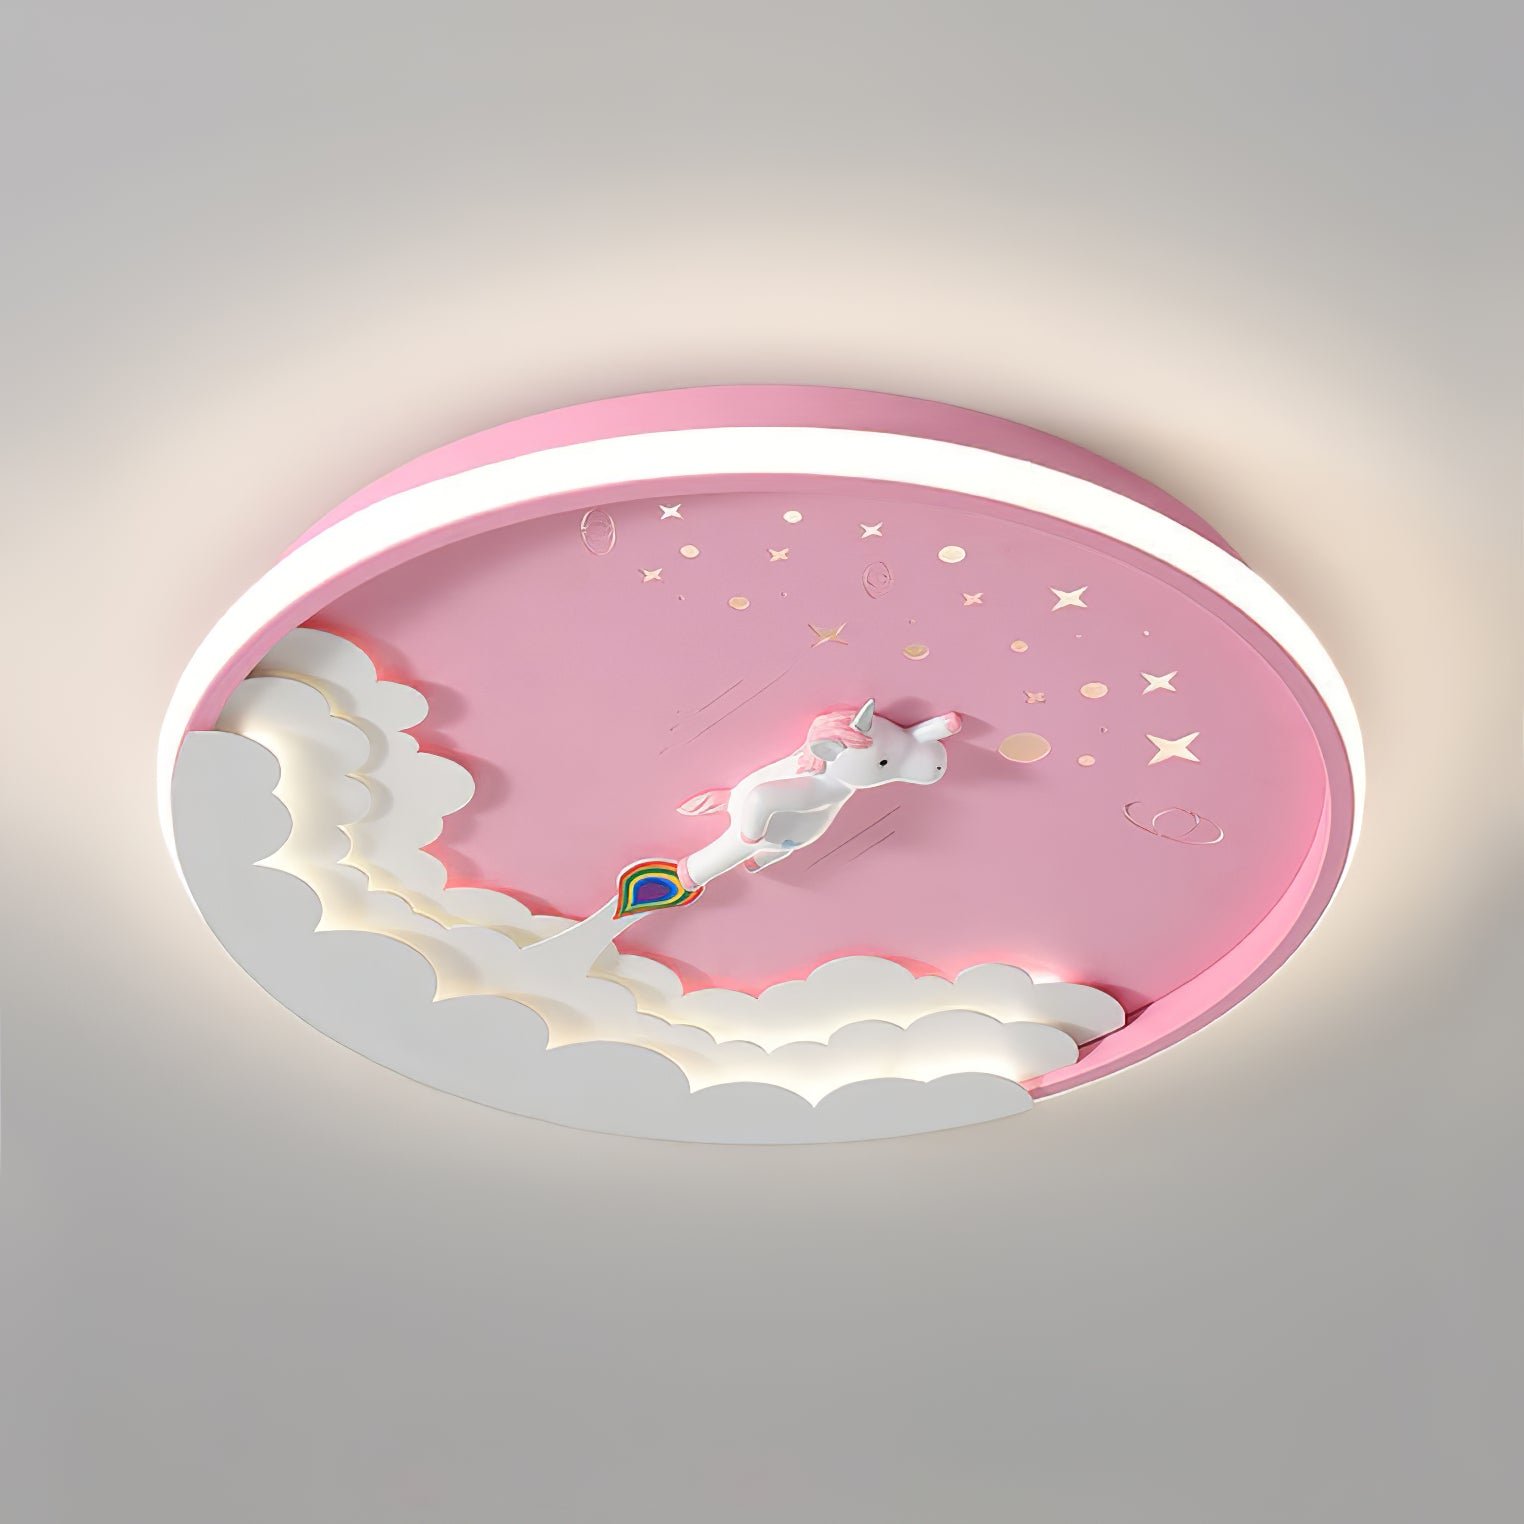 Pink Round LED Starship Ceiling Light with a diameter of 19.7" and a height of 5.9" (50cm x 15cm) in Cool Light